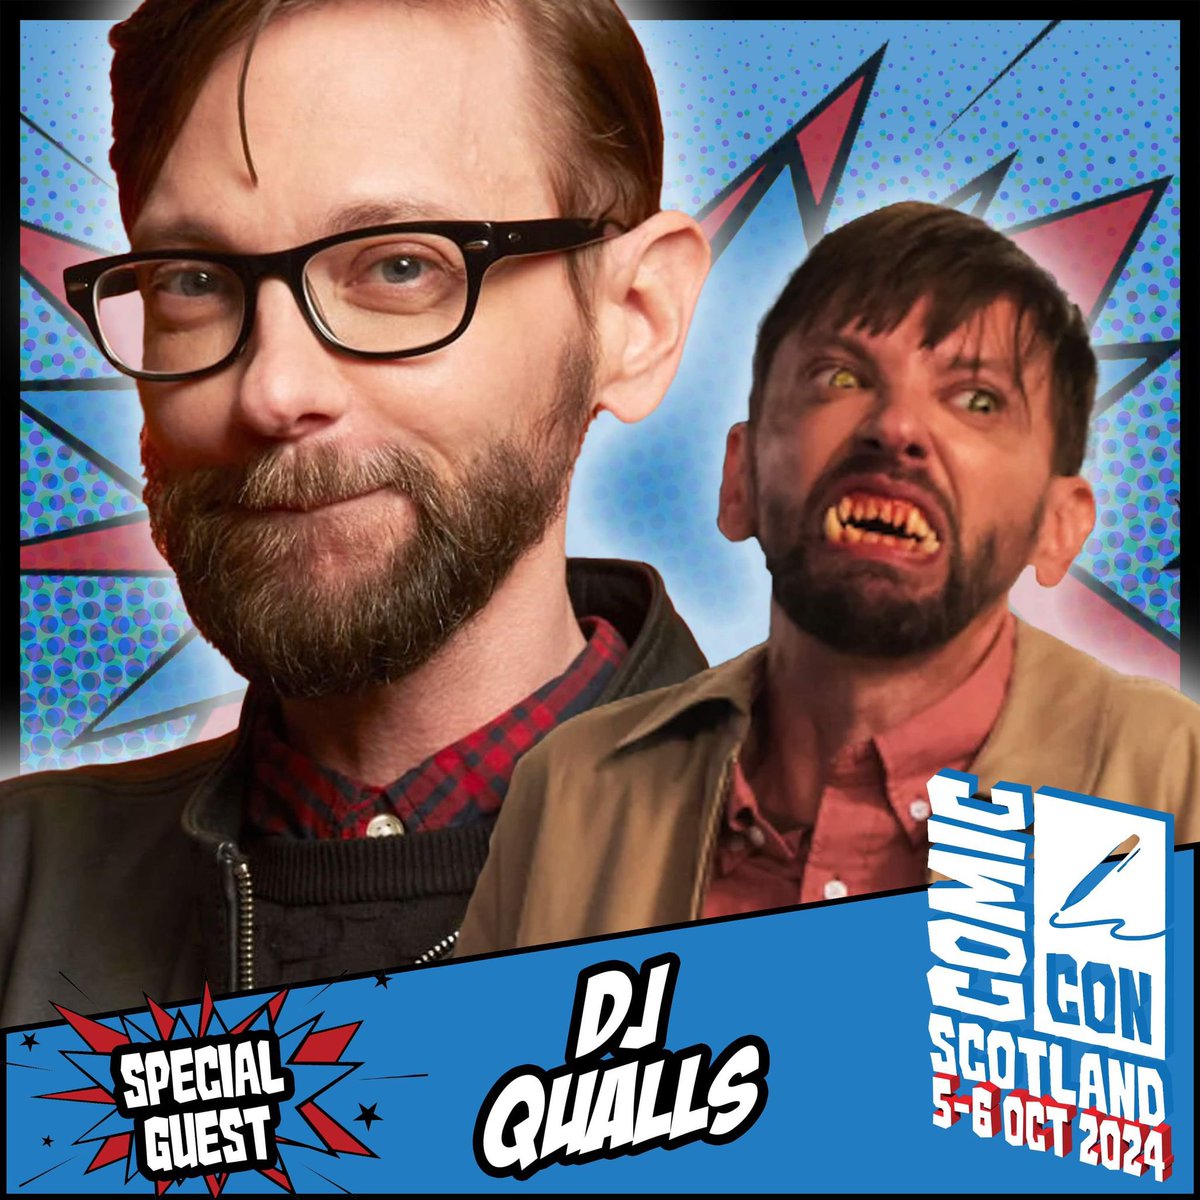 Comic Con Scotland welcomes DJ Qualls, known for projects such as Supernatural, The Man in the High Castle, Road Trip, and many more. Appearing 5-6 October! Tickets: comicconventionscotland.co.uk